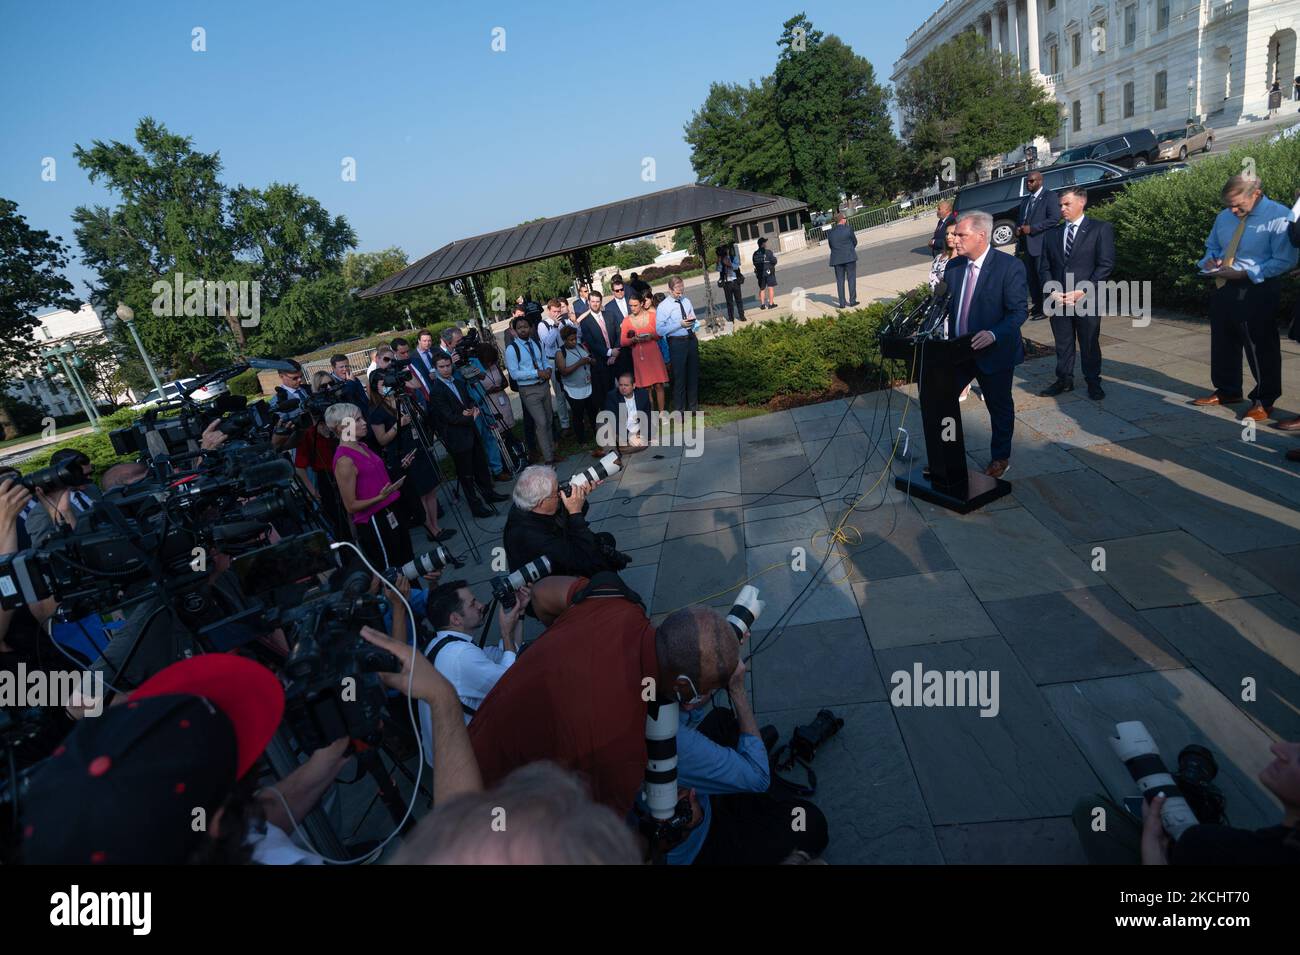 Repubican Leader Kevin McCarthy, Republican Whip Steve Scalise, Rep. Jim Jordan, Republican Conference Chairwoman Elise Stefanik and others hold a news conference in front of the U.S. Capitol July 27, 2021 in Washington, DC. Leader McCarthy held a news conference to discuss the January 6th Committee. (Photo by Zach D Roberts/NurPhoto) Stock Photo